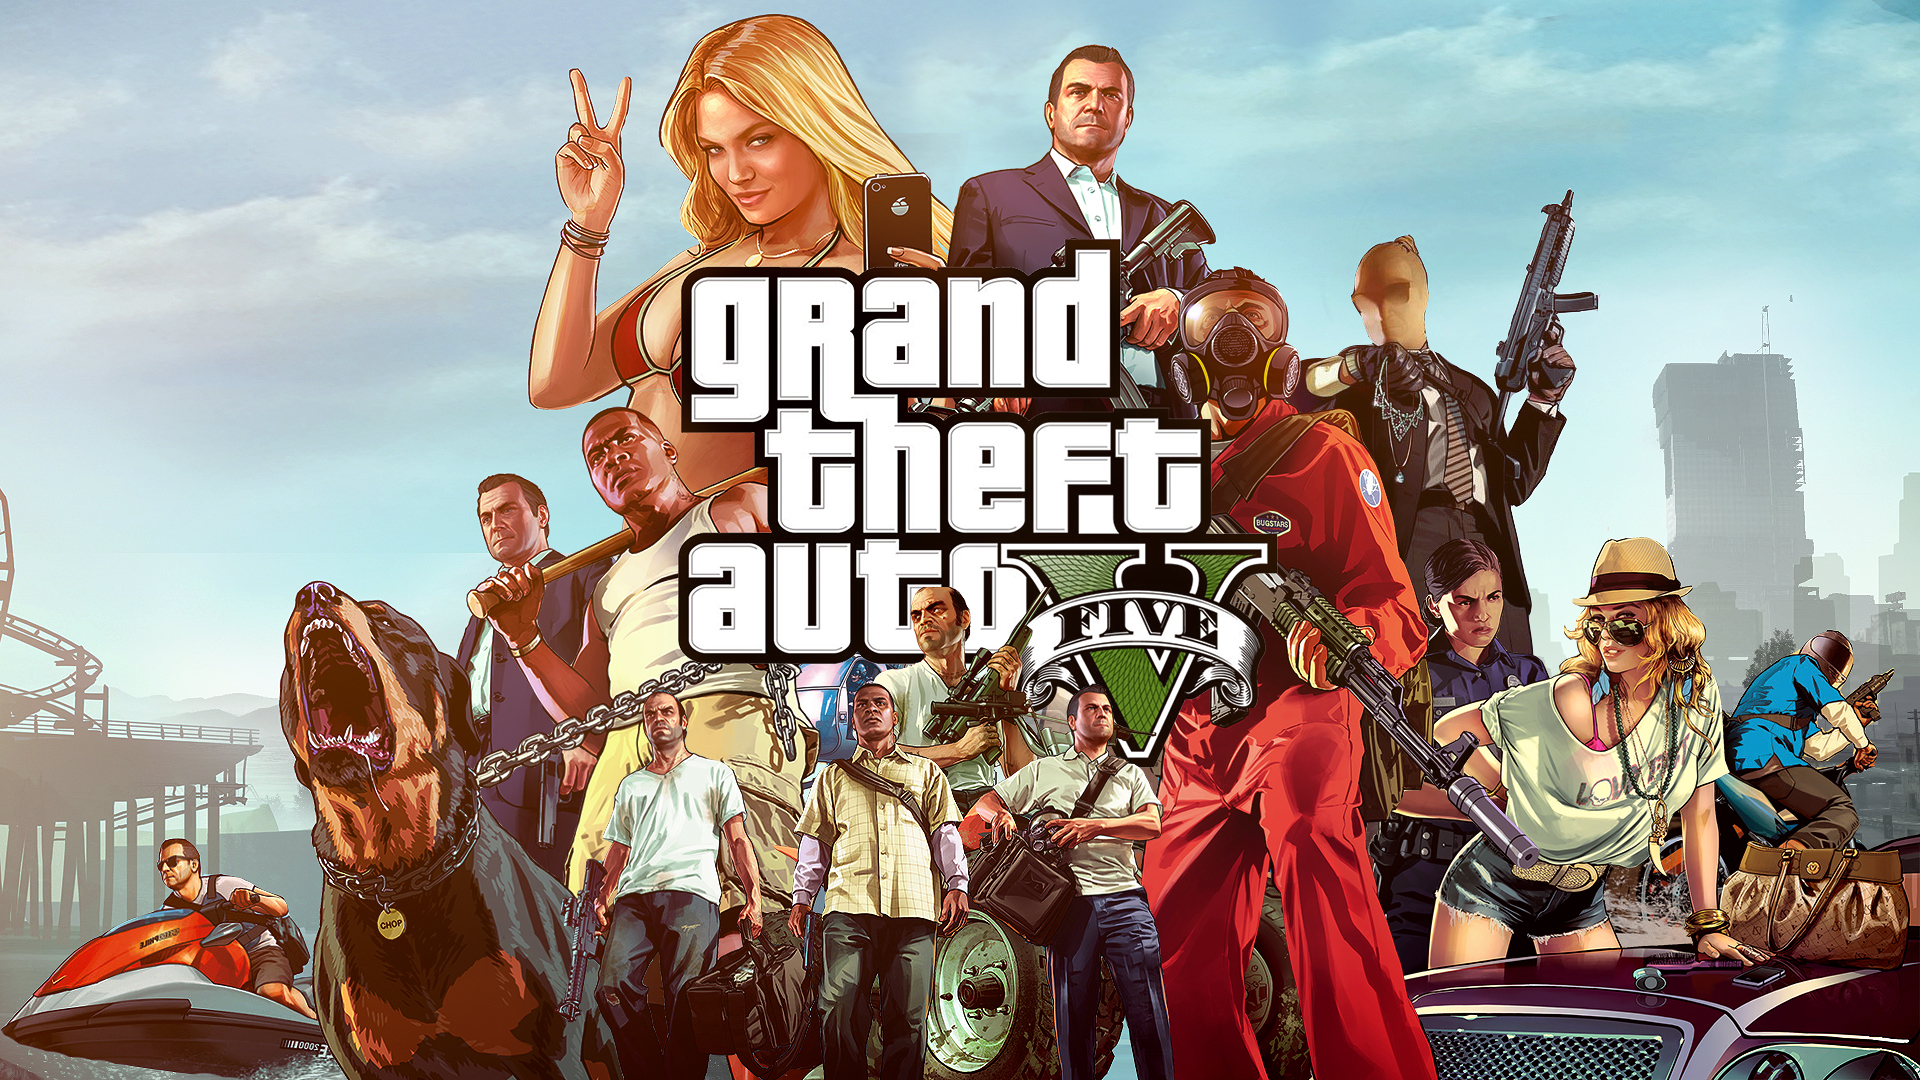 Grand Theft Auto 5 Games Images HD Wallpapers Gallery